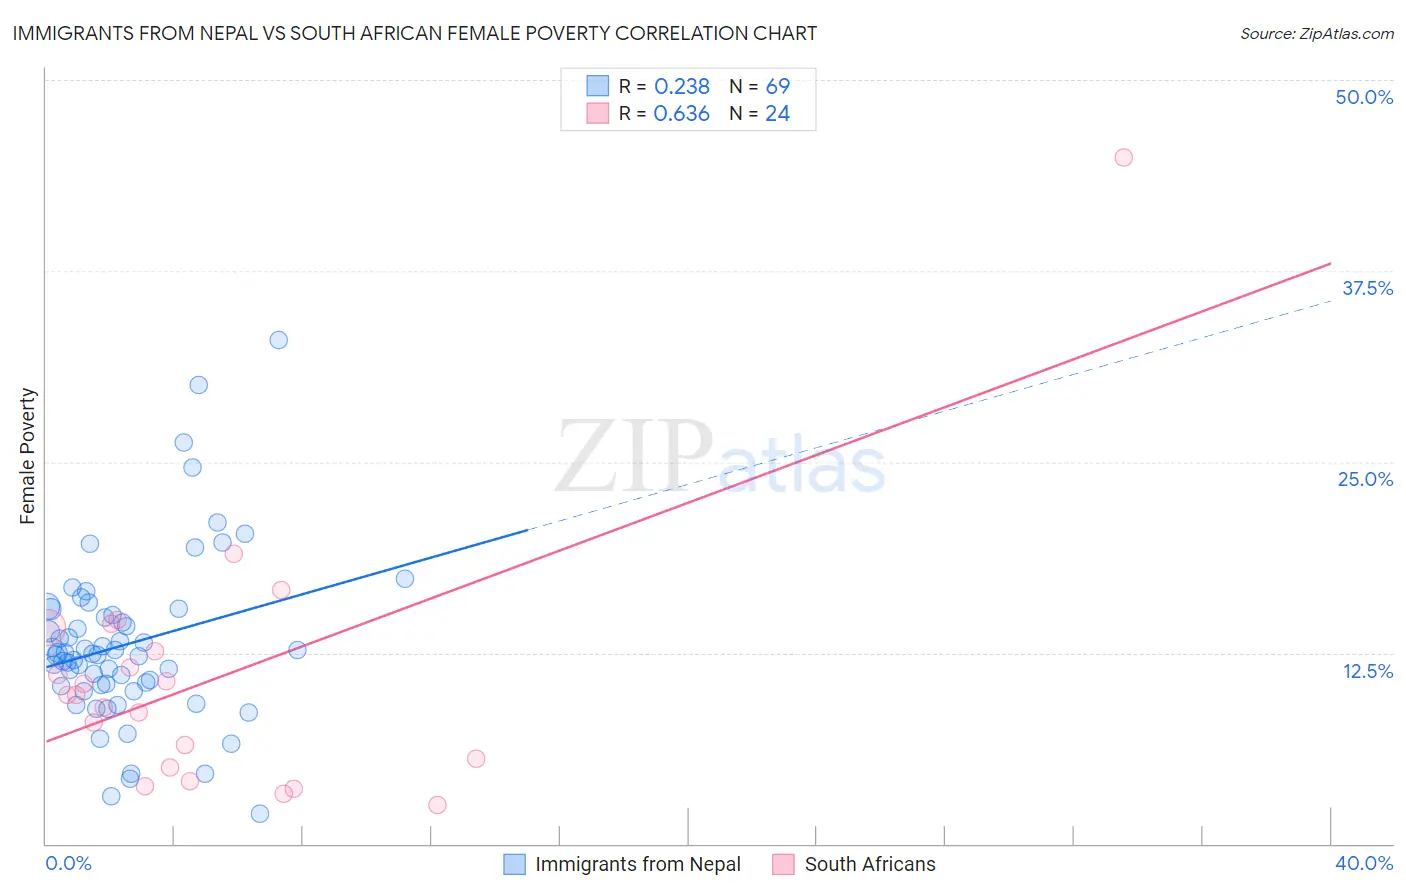 Immigrants from Nepal vs South African Female Poverty